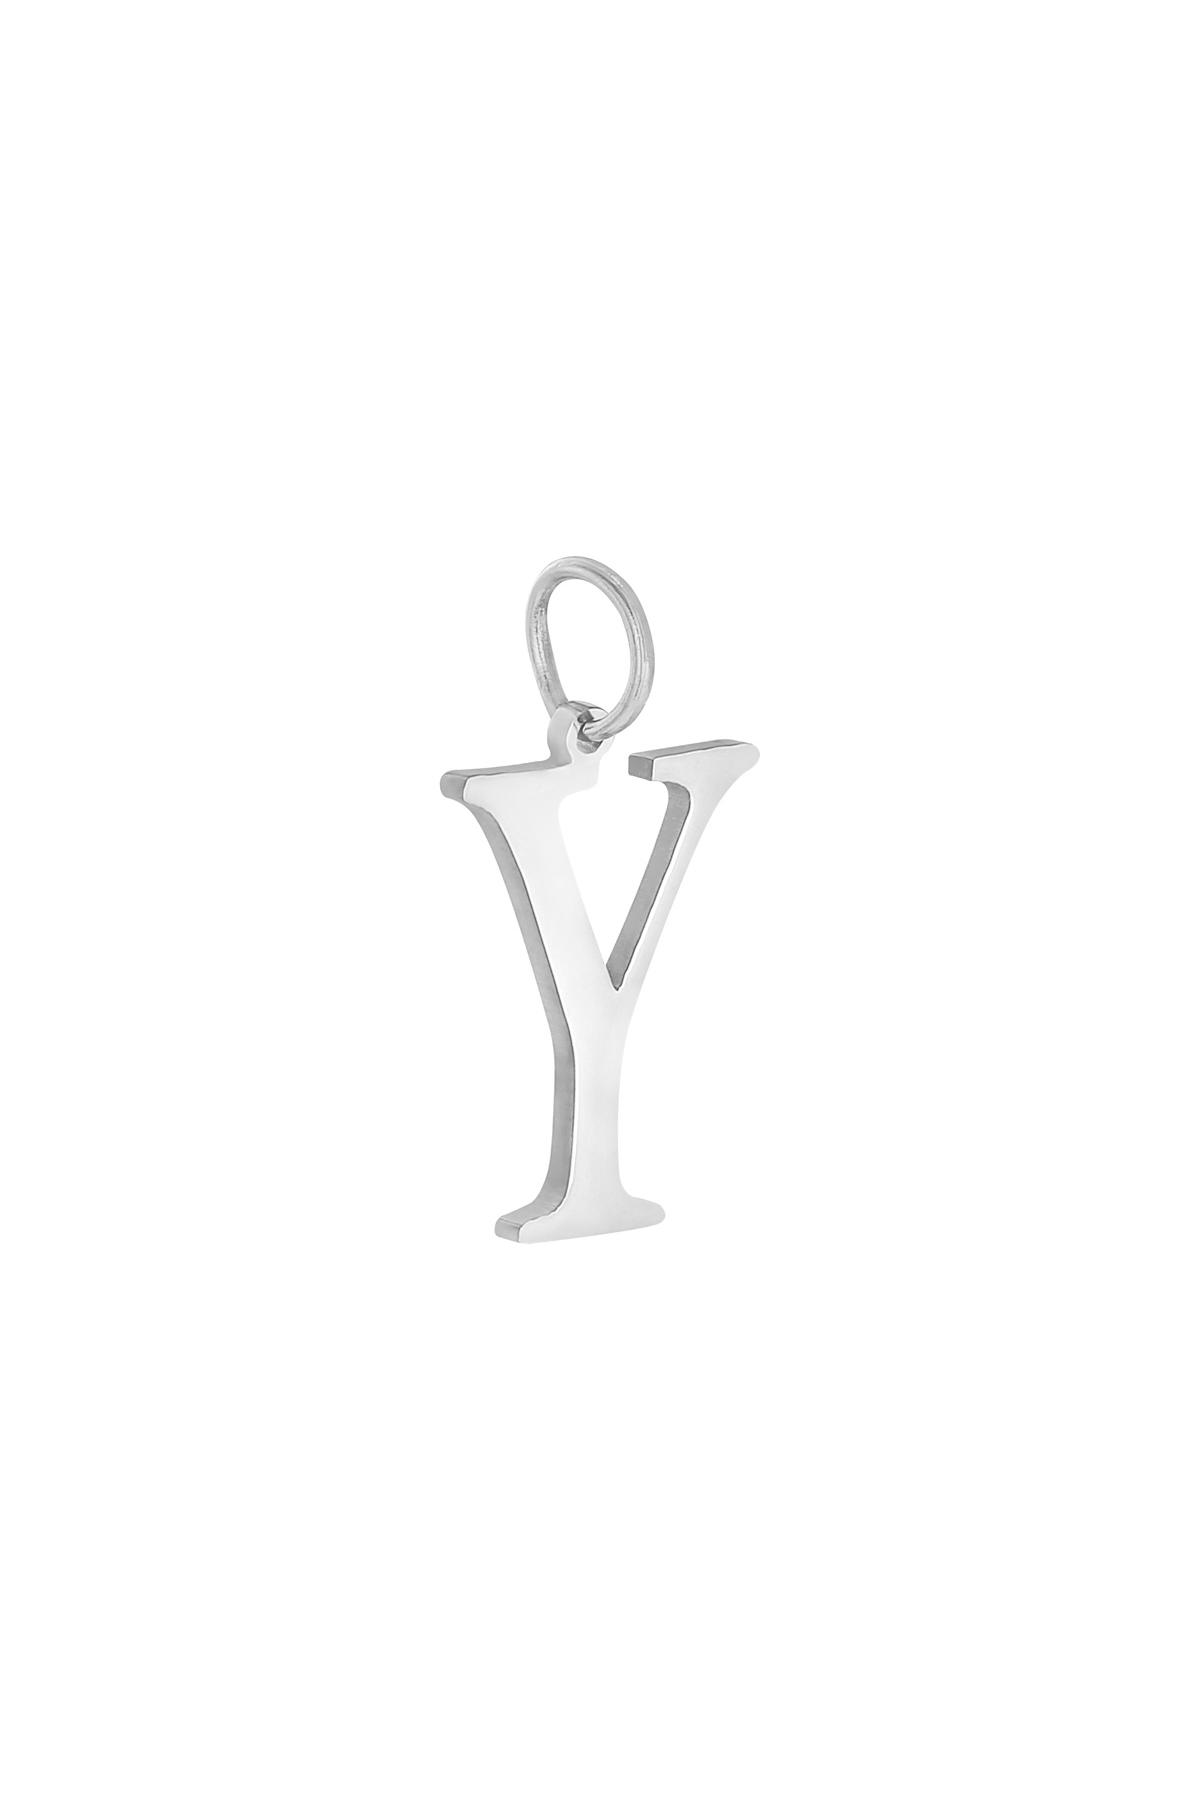 Silver / Charm Y Silver Stainless Steel Immagine35